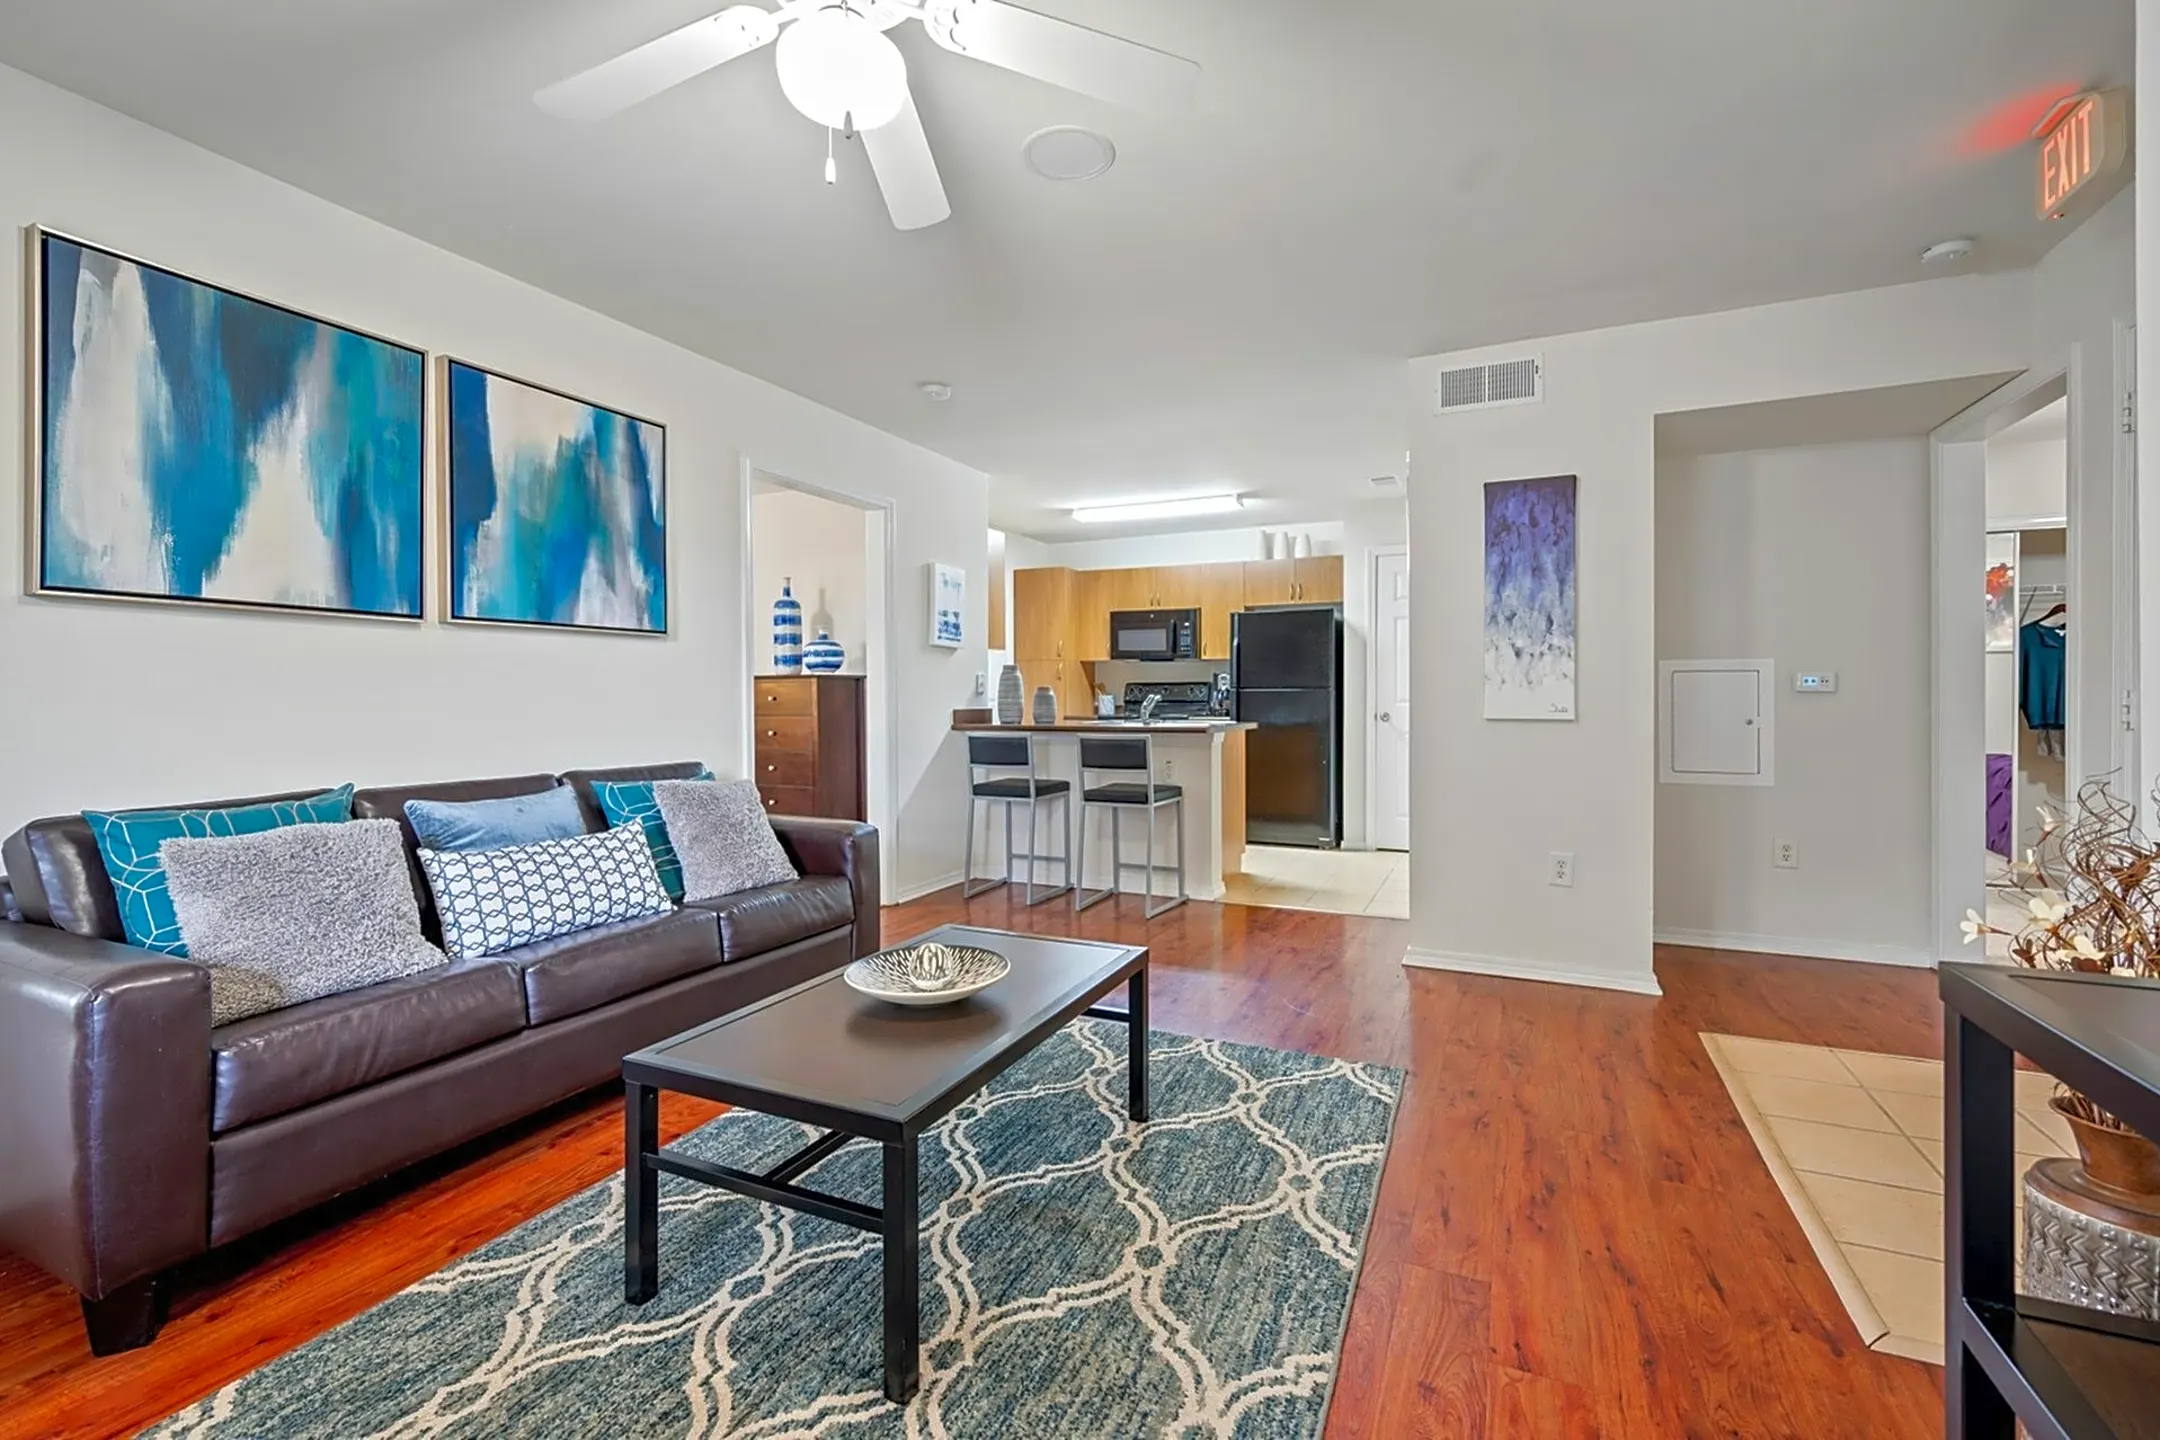 Living Room - The Connection - Per Bed Lease - Statesboro, GA